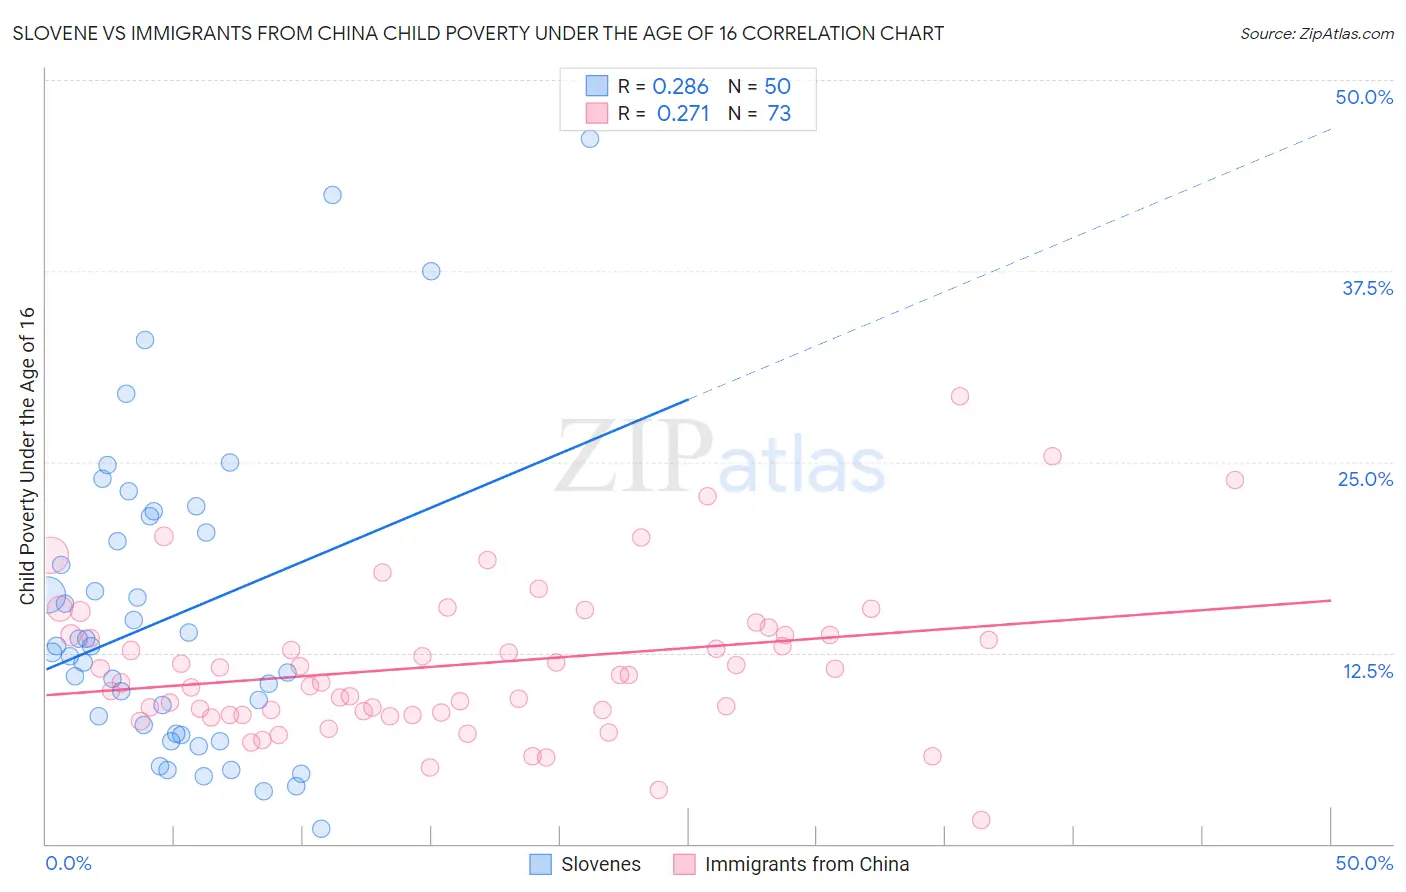 Slovene vs Immigrants from China Child Poverty Under the Age of 16